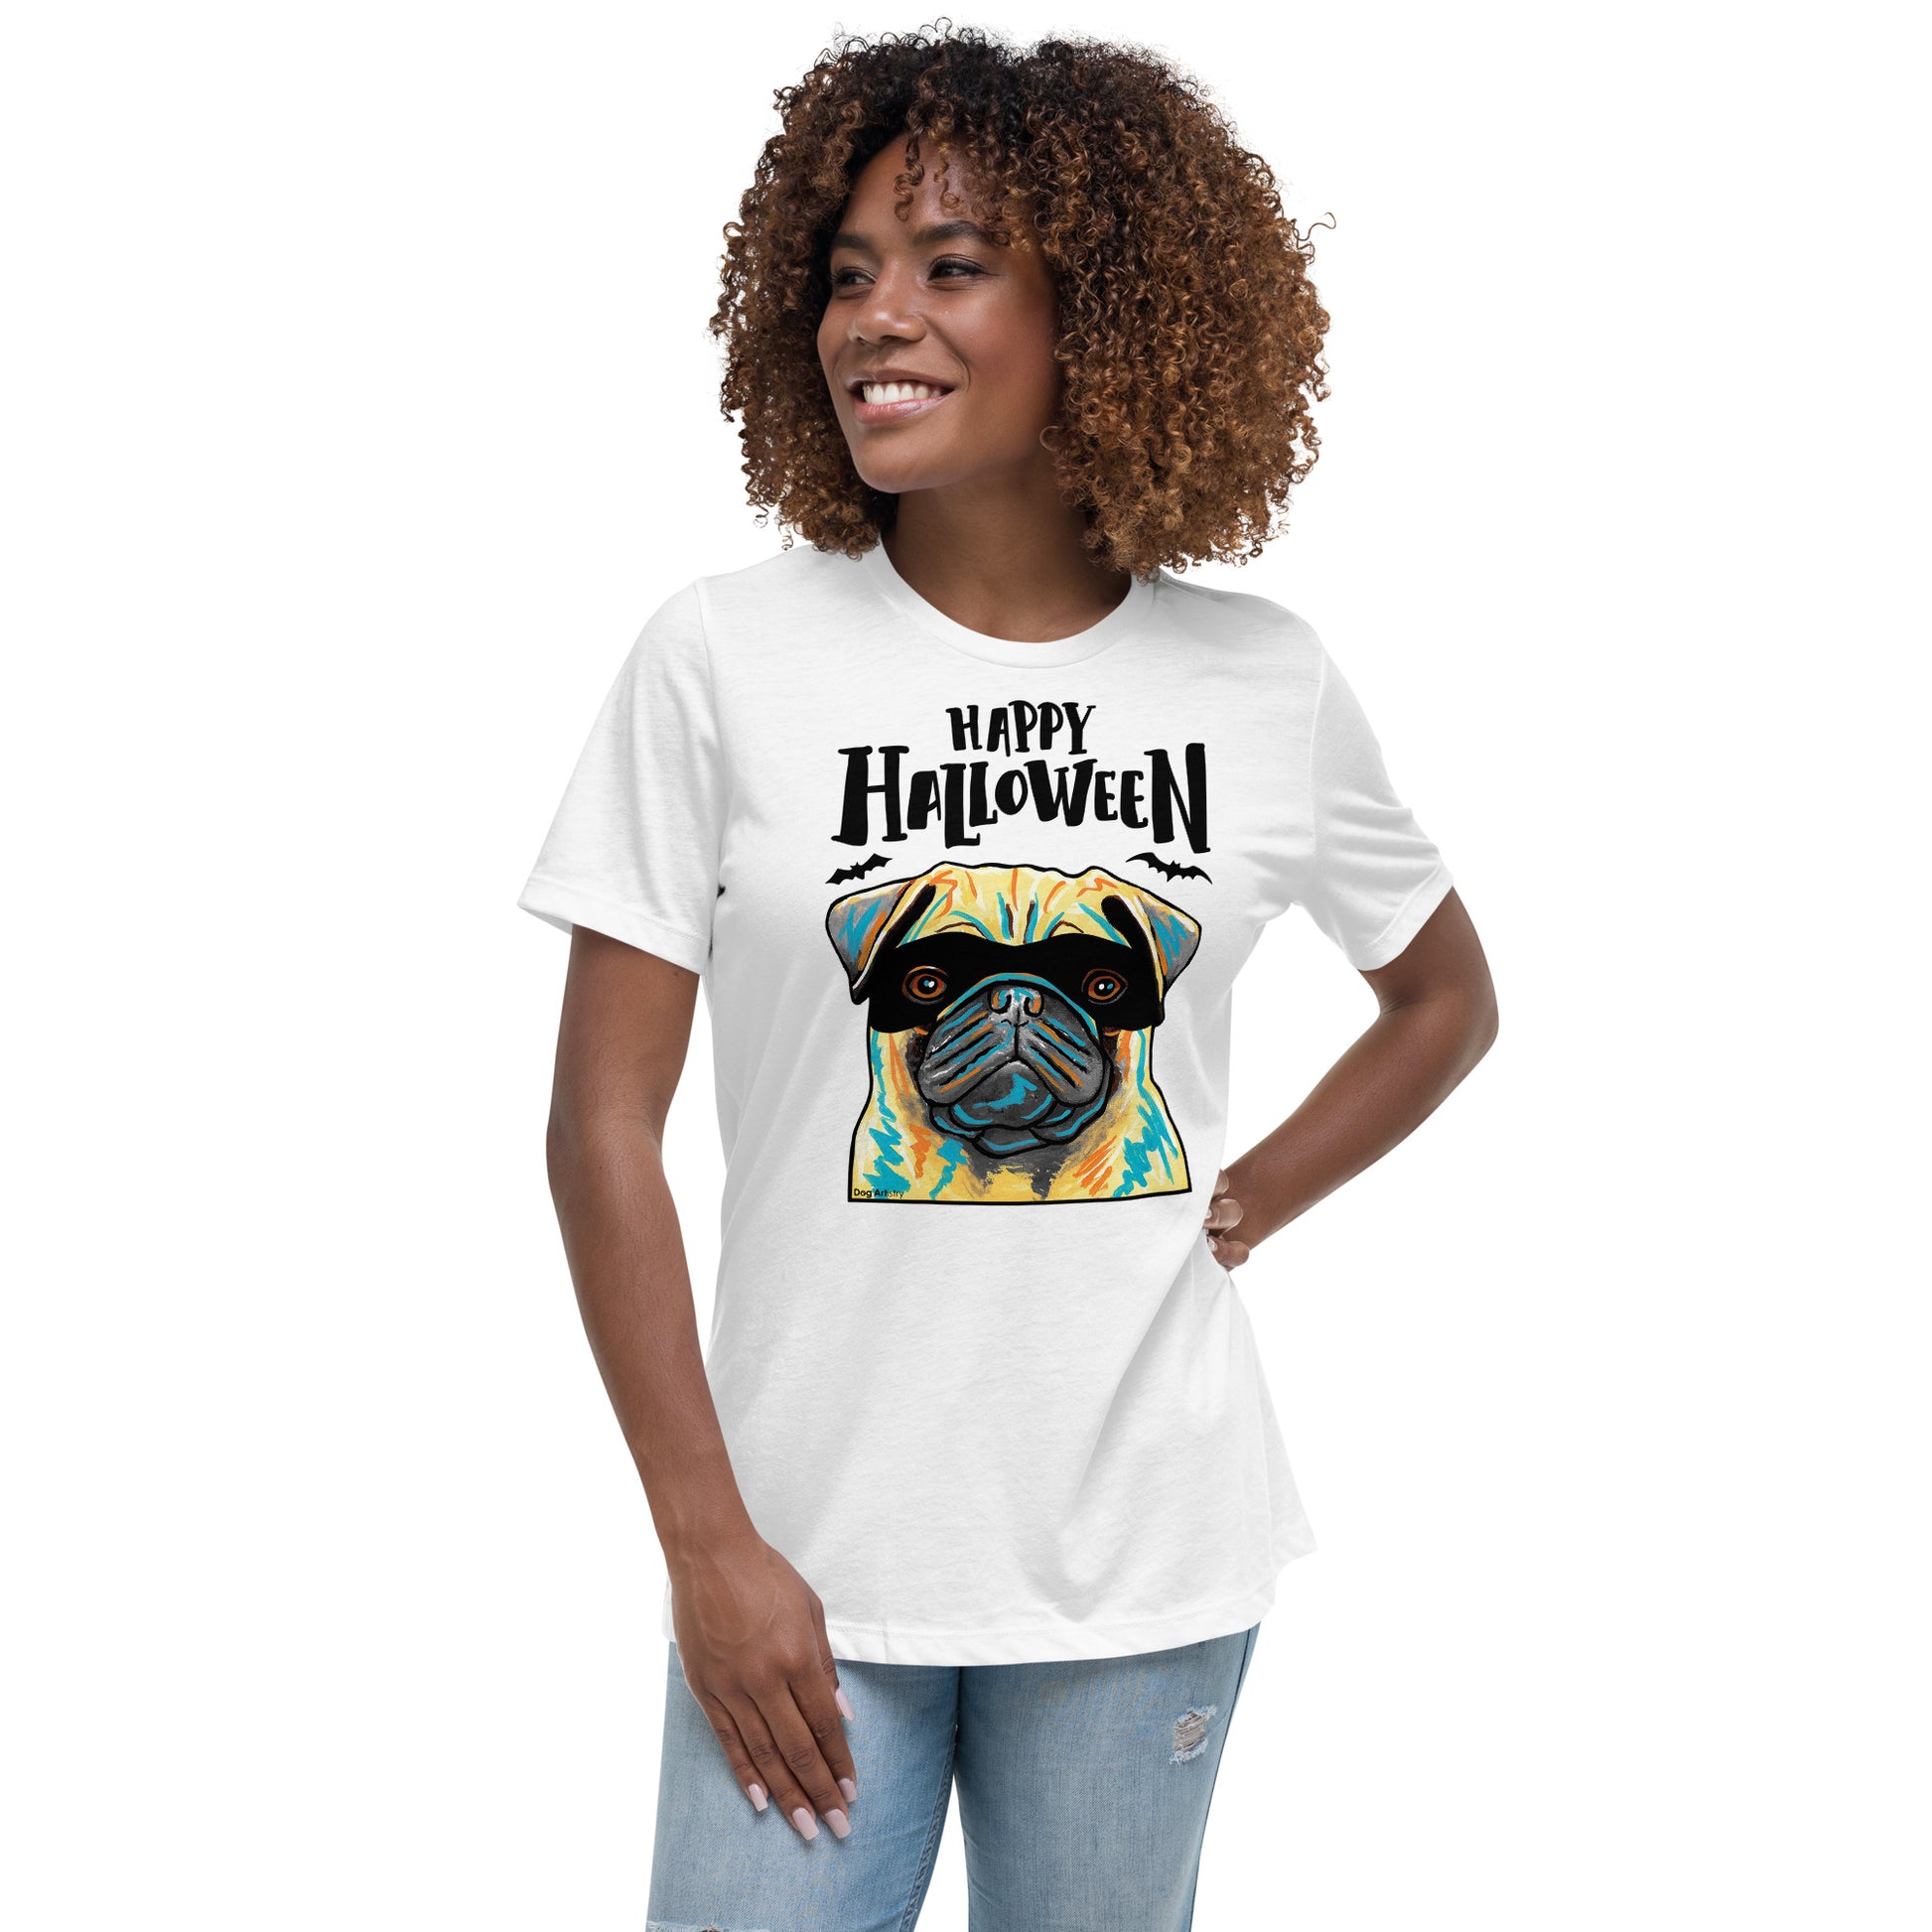 Funny Happy Halloween Pug wearing mask women’s white t-shirt by Dog Artistry.